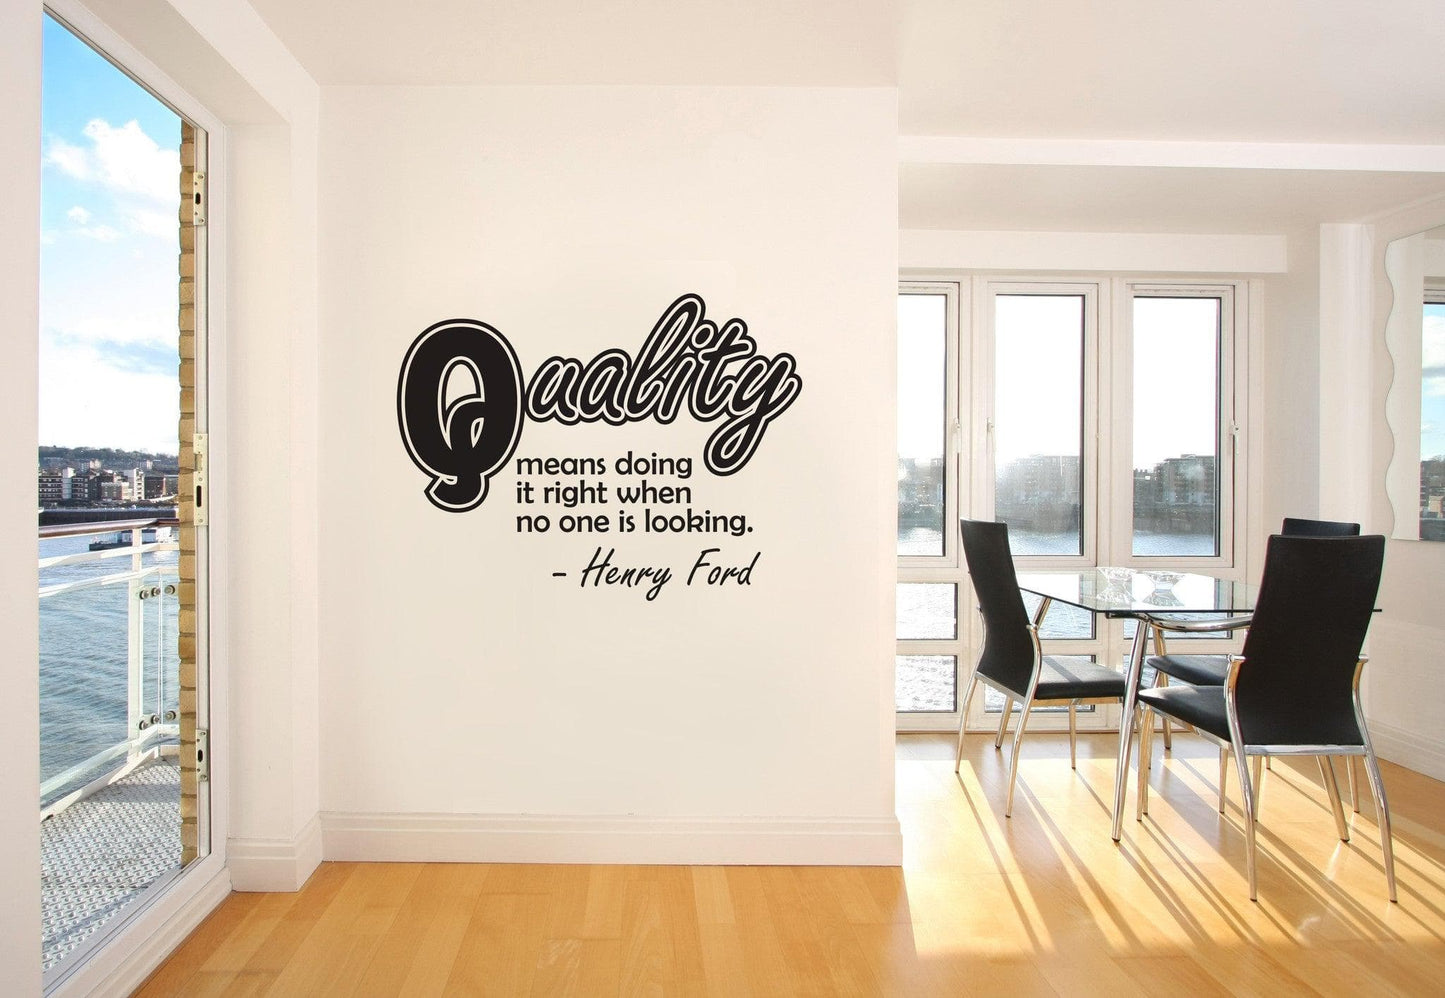 Henry Ford Quote: "Quality means doing it right when no one is looking" - Motivational Quote Wall Decal. #OS_DC506